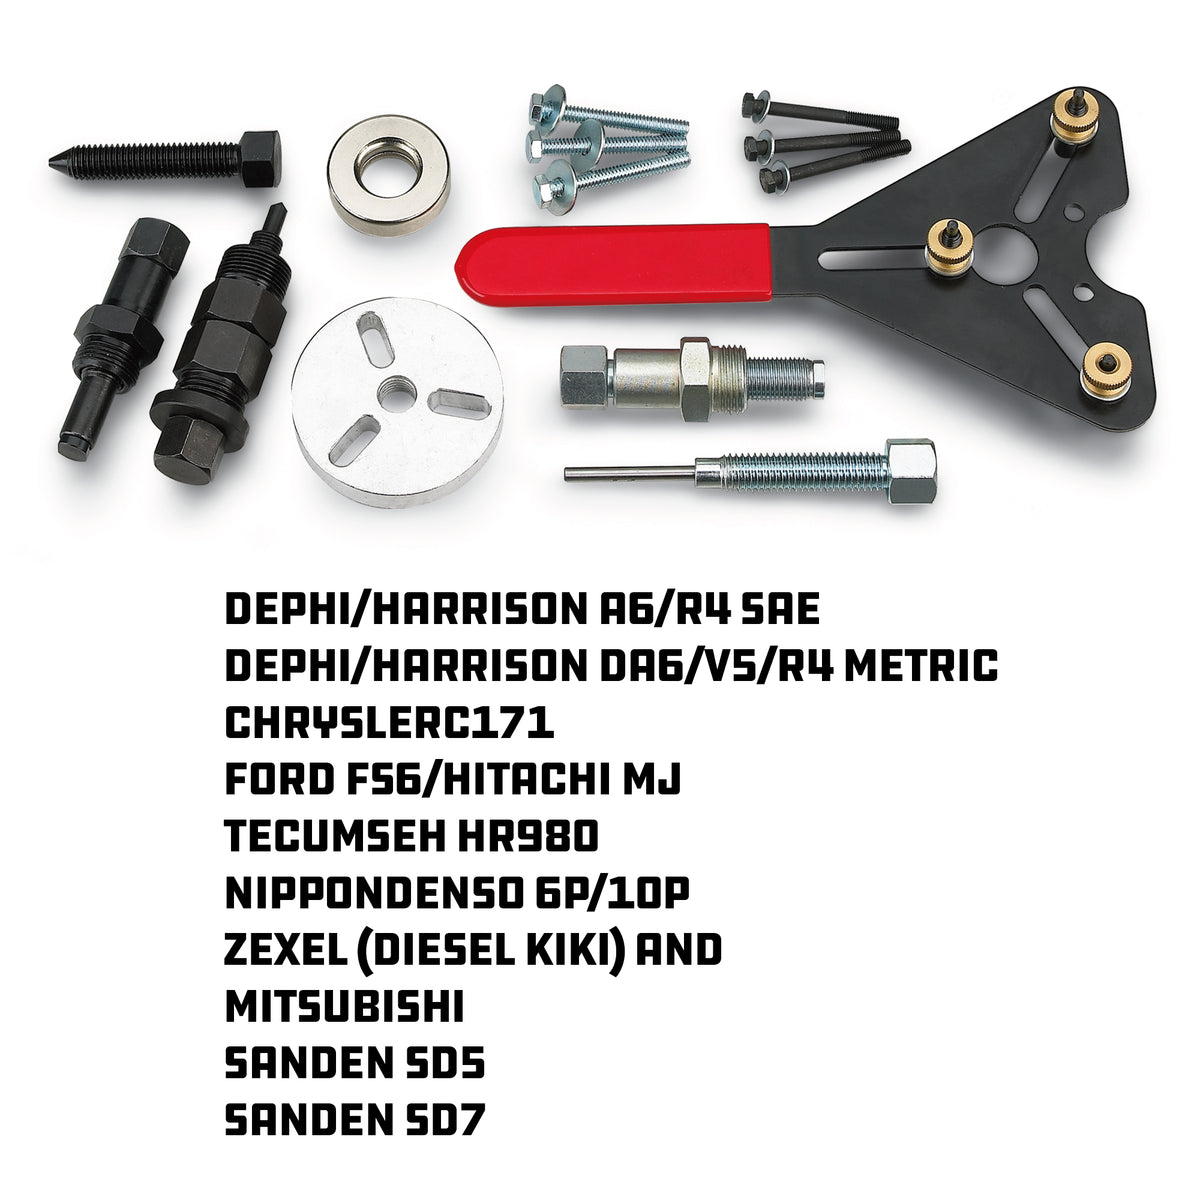 A/C Clutch Removal And Installer Kit